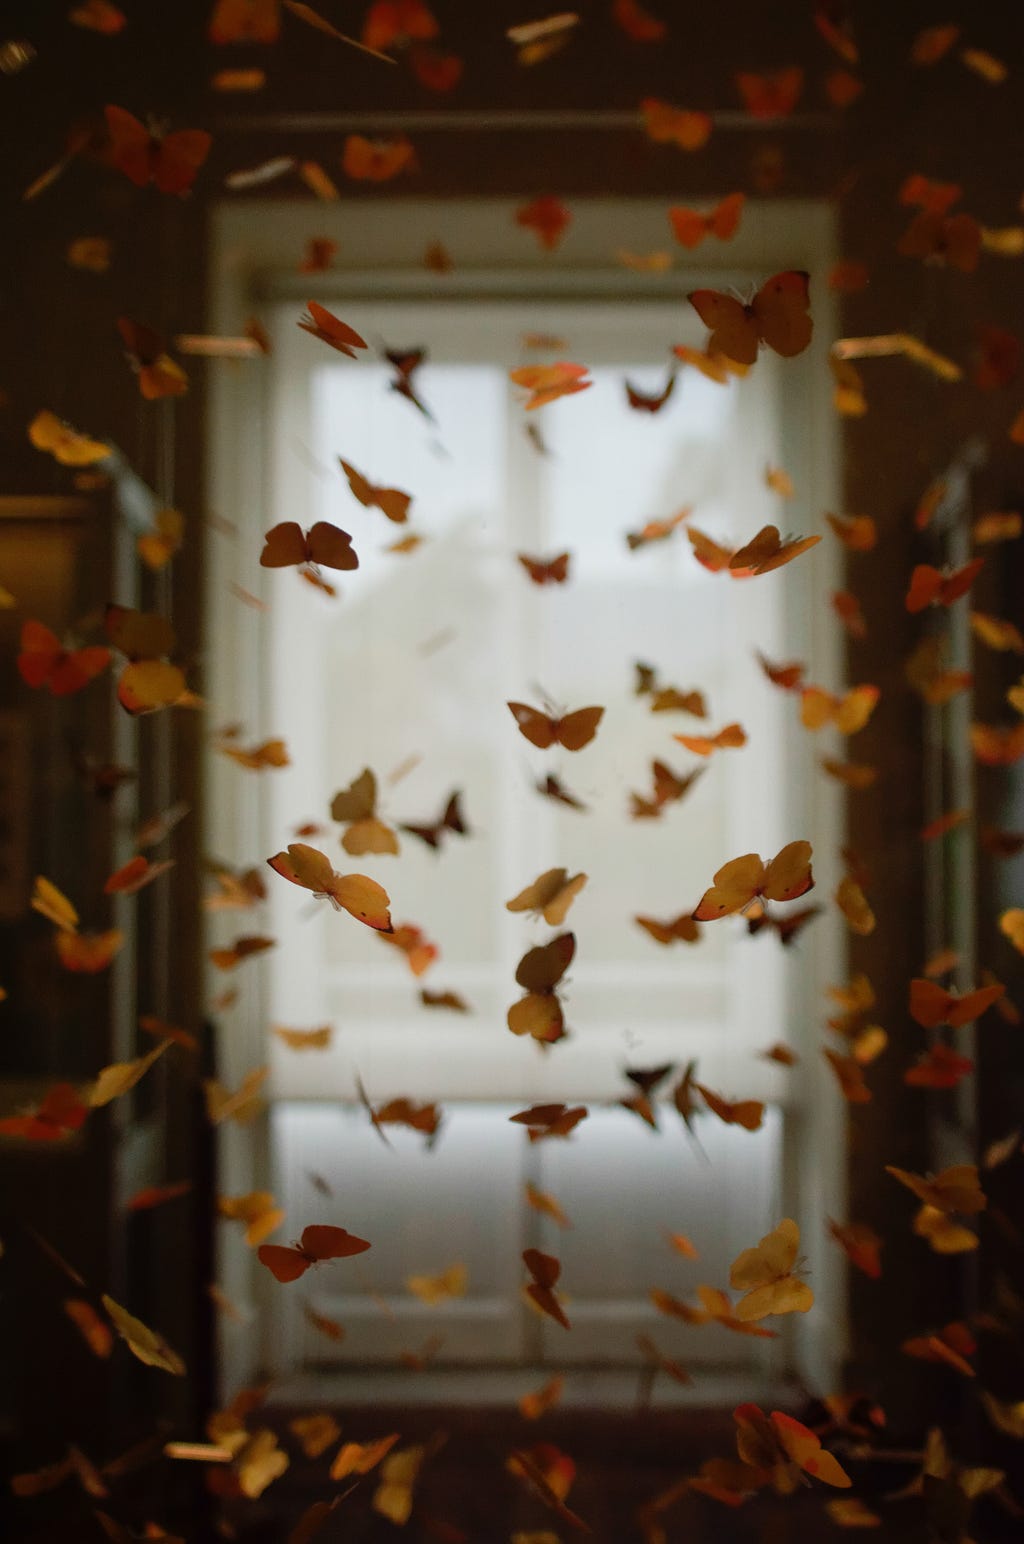 yellow and orange butterflies flying in front of a window